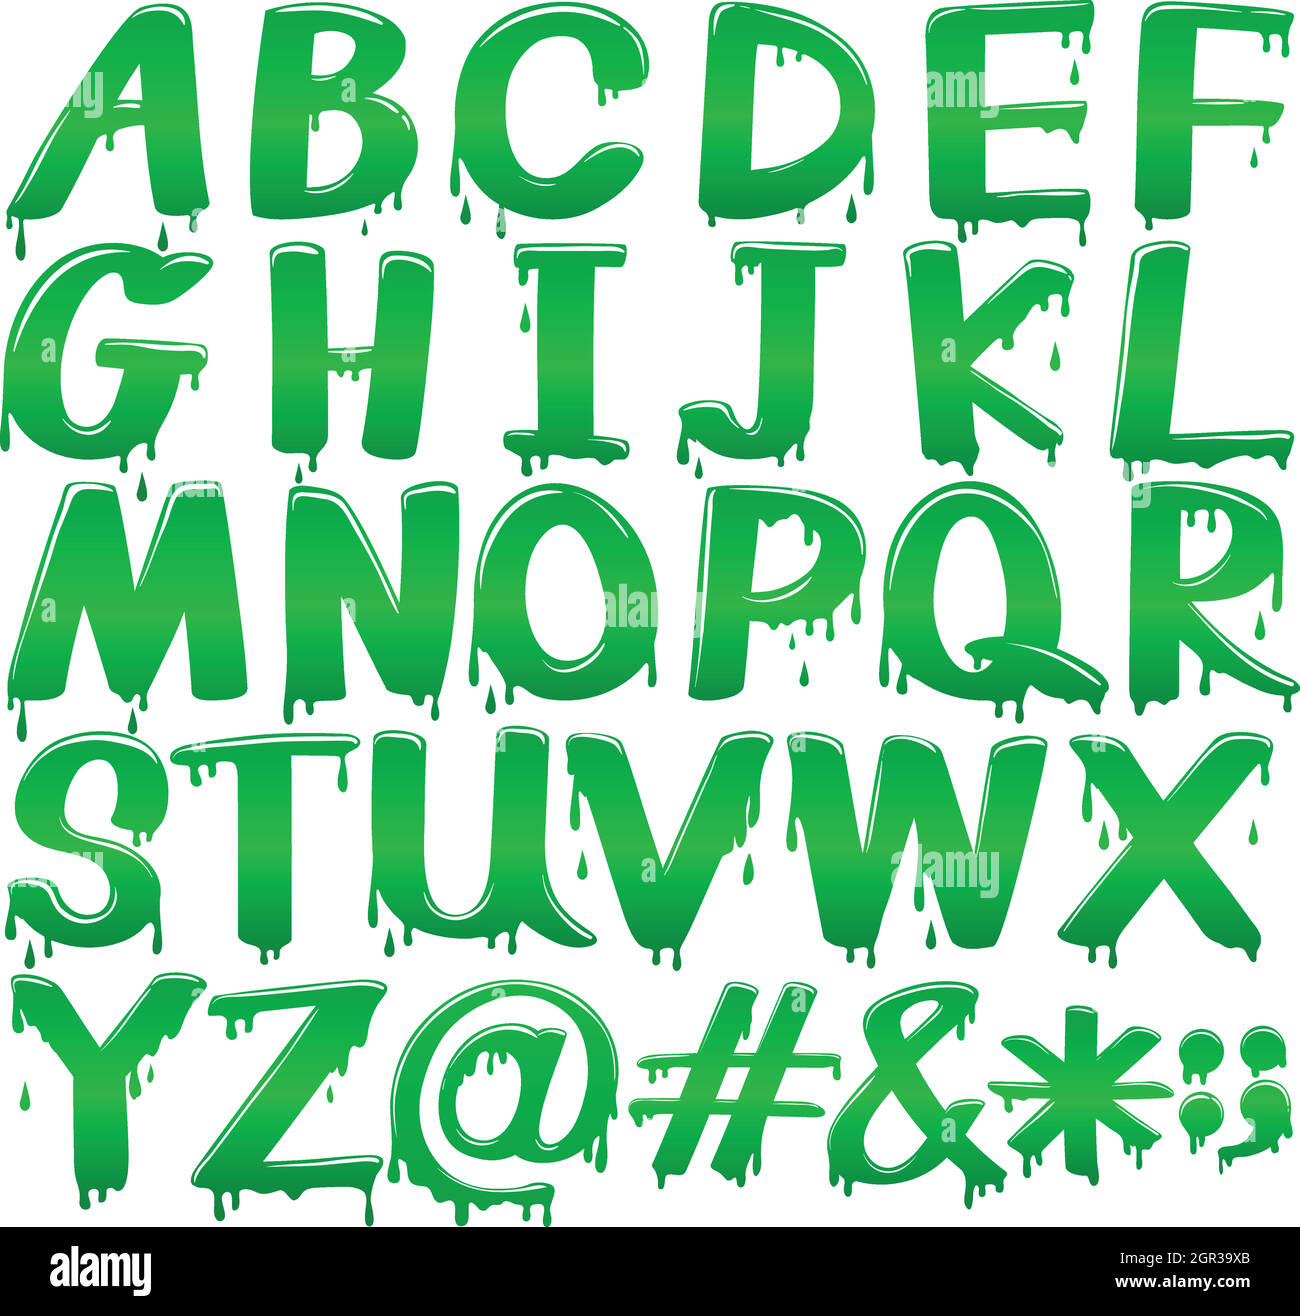 Letters of the alphabet in a melting green template Stock Vector